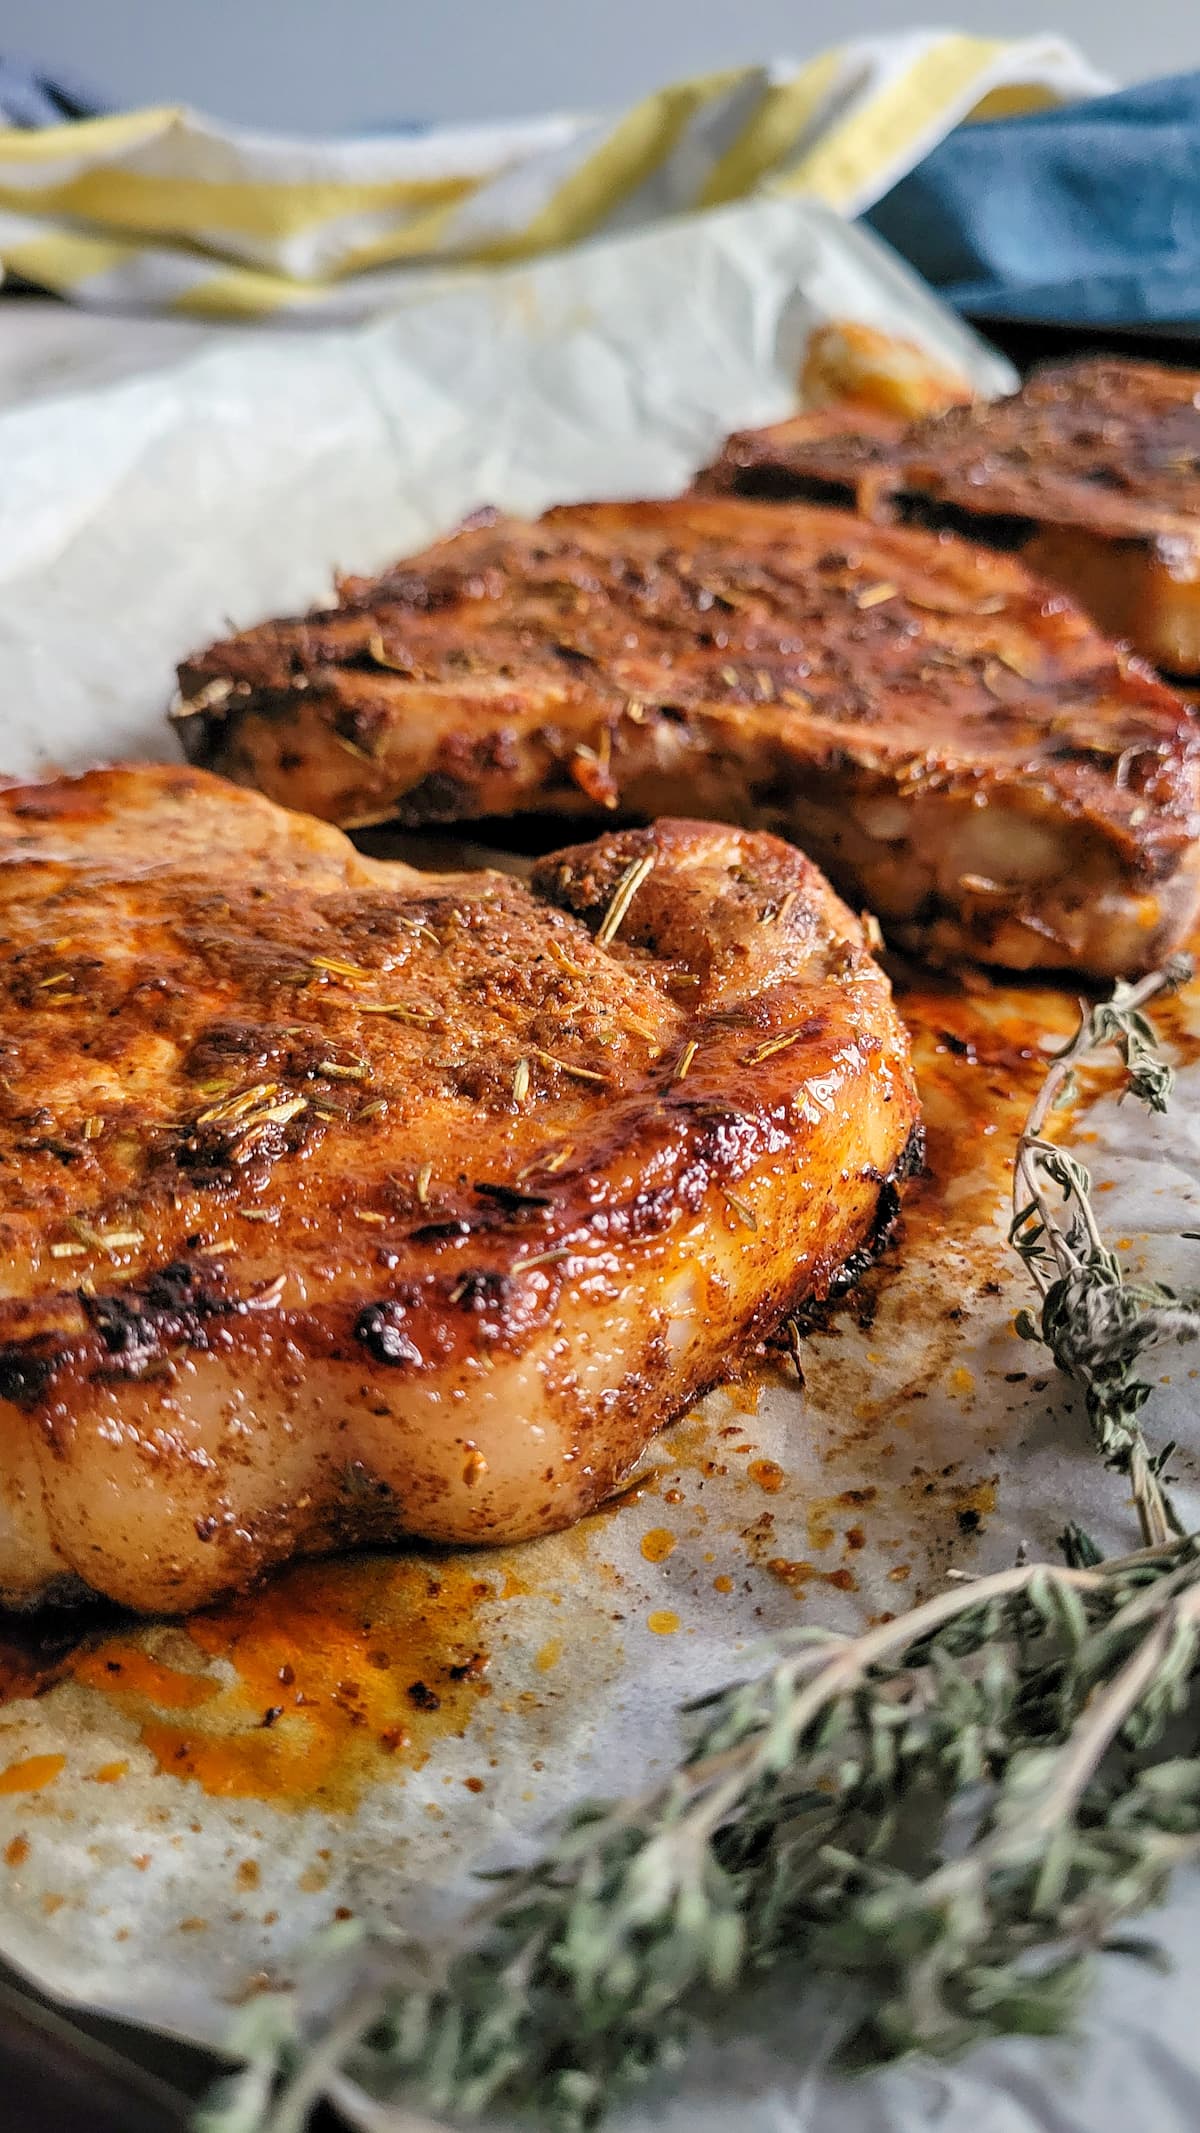 3 cooked and juicy pork chops on a parchment lined baking sheet with herbs